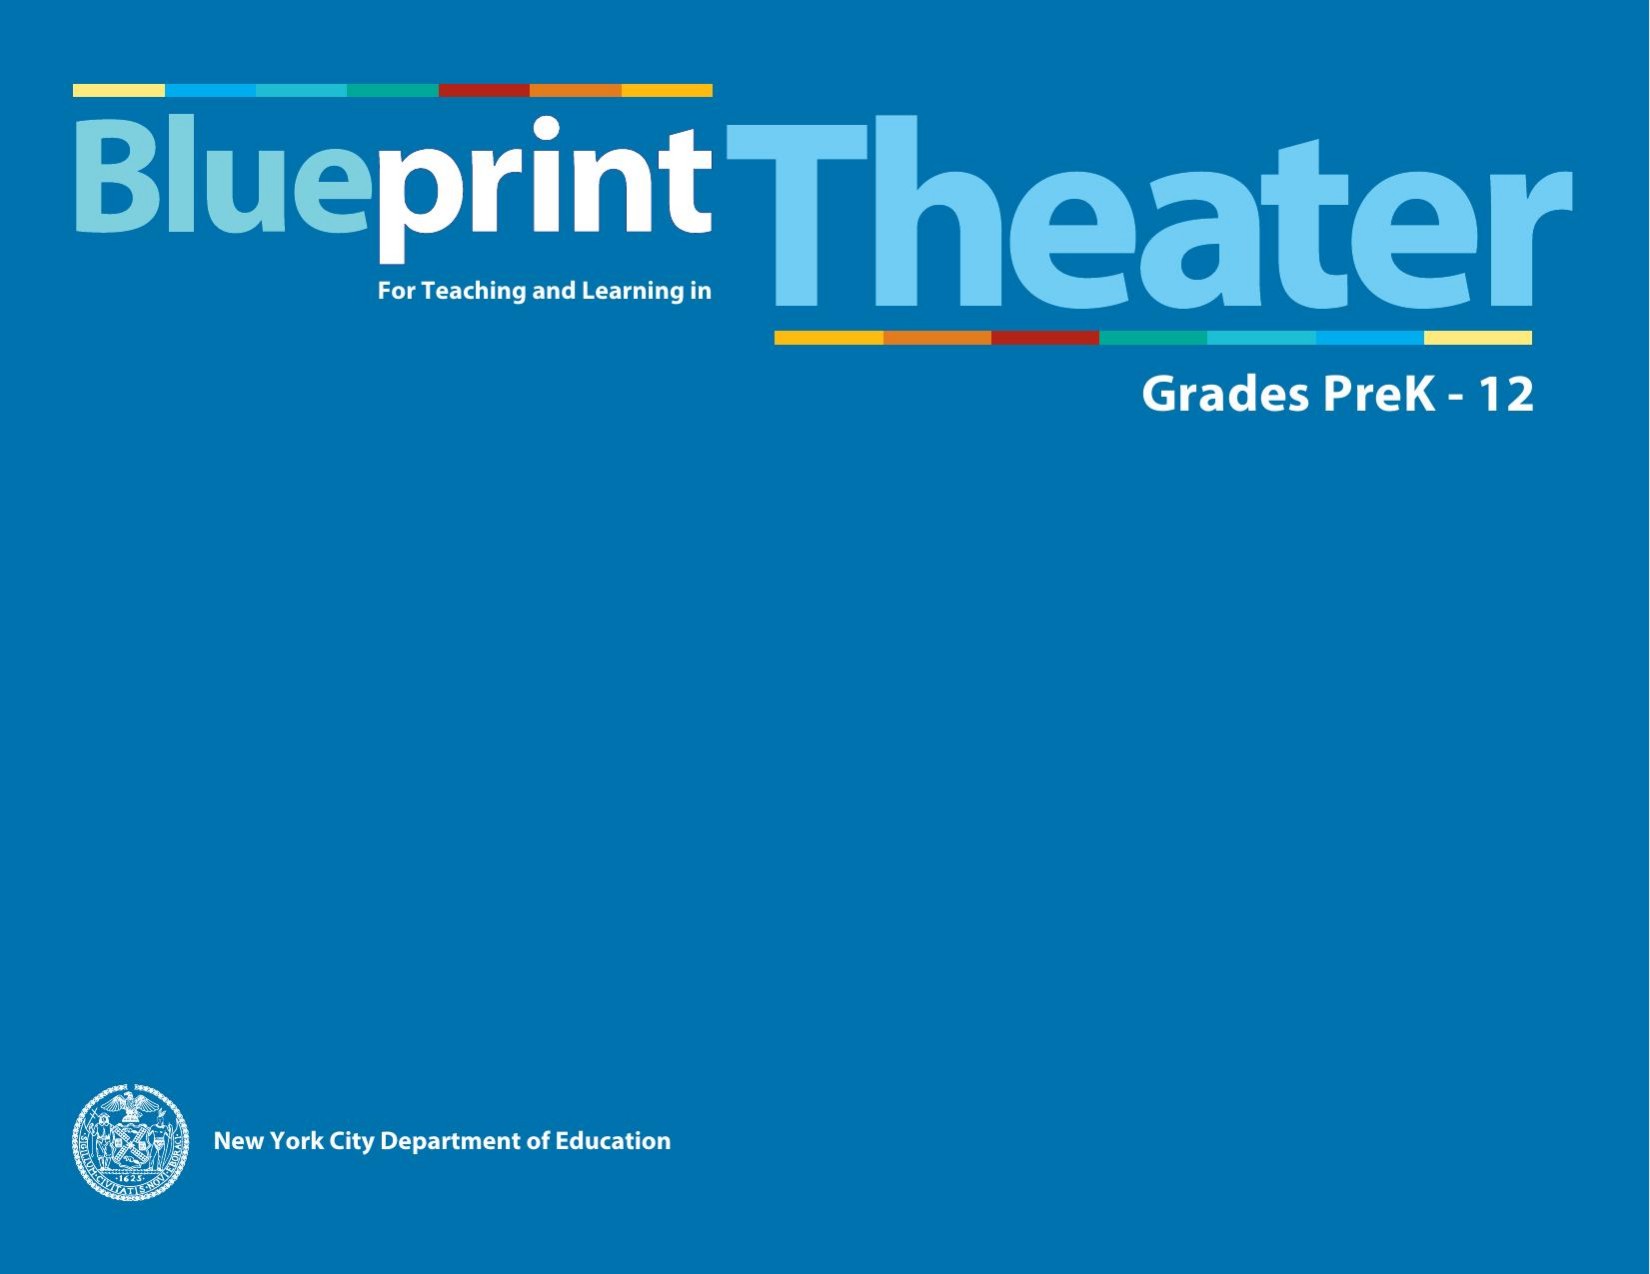 Download the Blueprint for Teaching and Learning in Theater2015